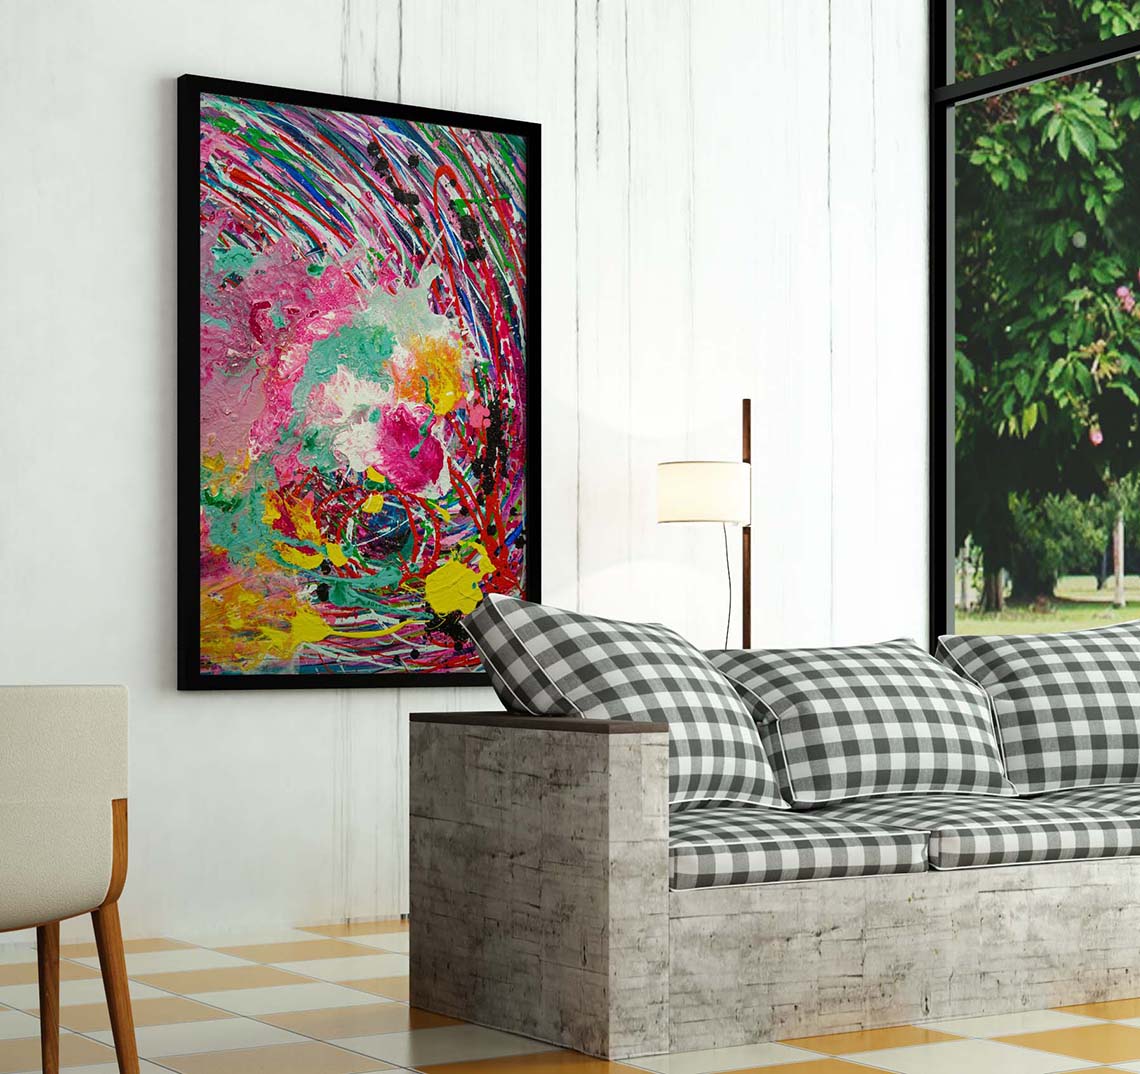 Abstract 21 Symmetry art by Doug LaRue in a black frame on a wall in living room wall